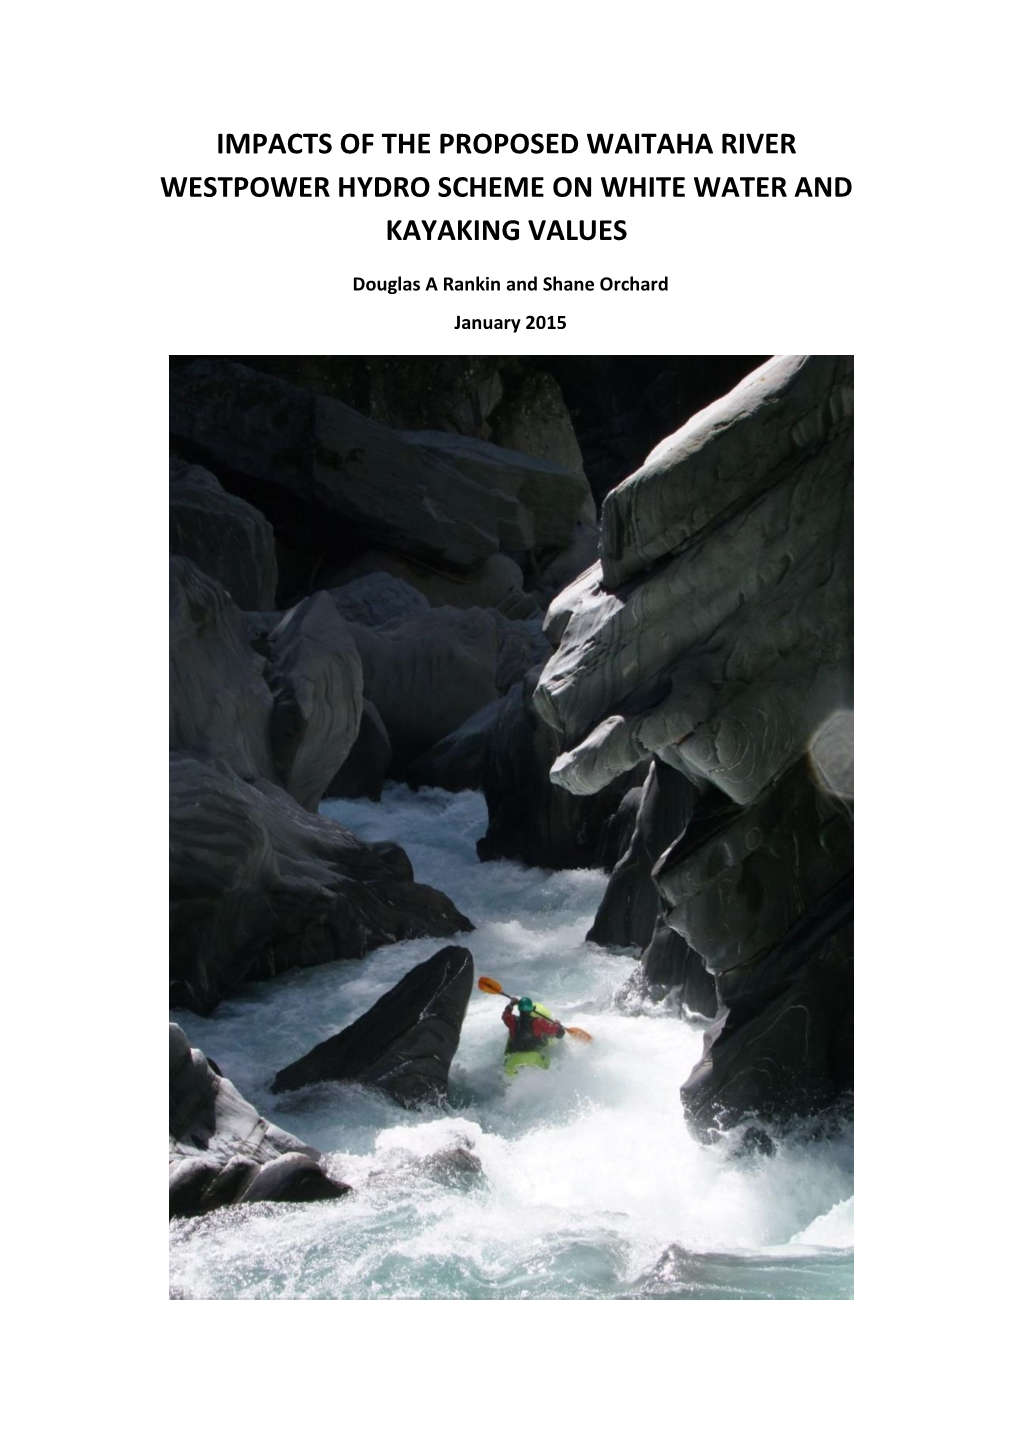 Impacts of the Proposed Waitaha River Westpower Hydro Scheme on White Water and Kayaking Values